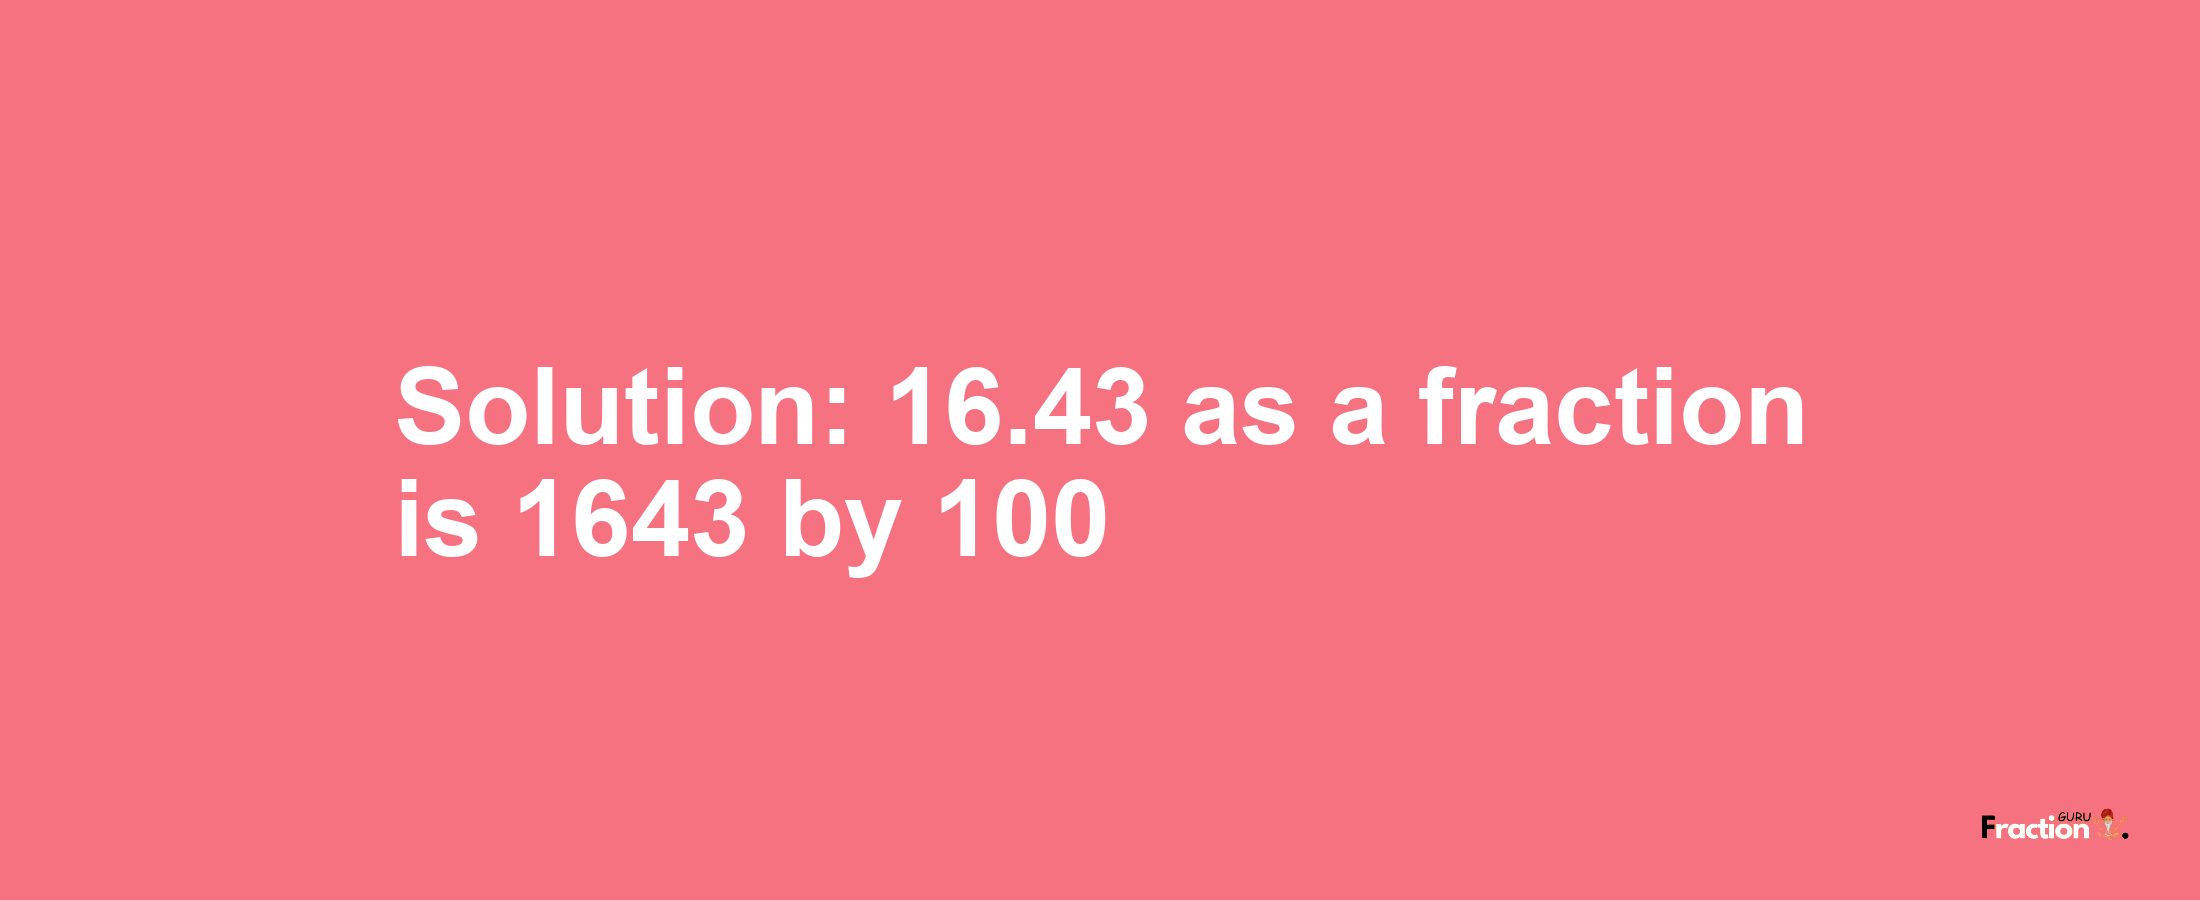 Solution:16.43 as a fraction is 1643/100